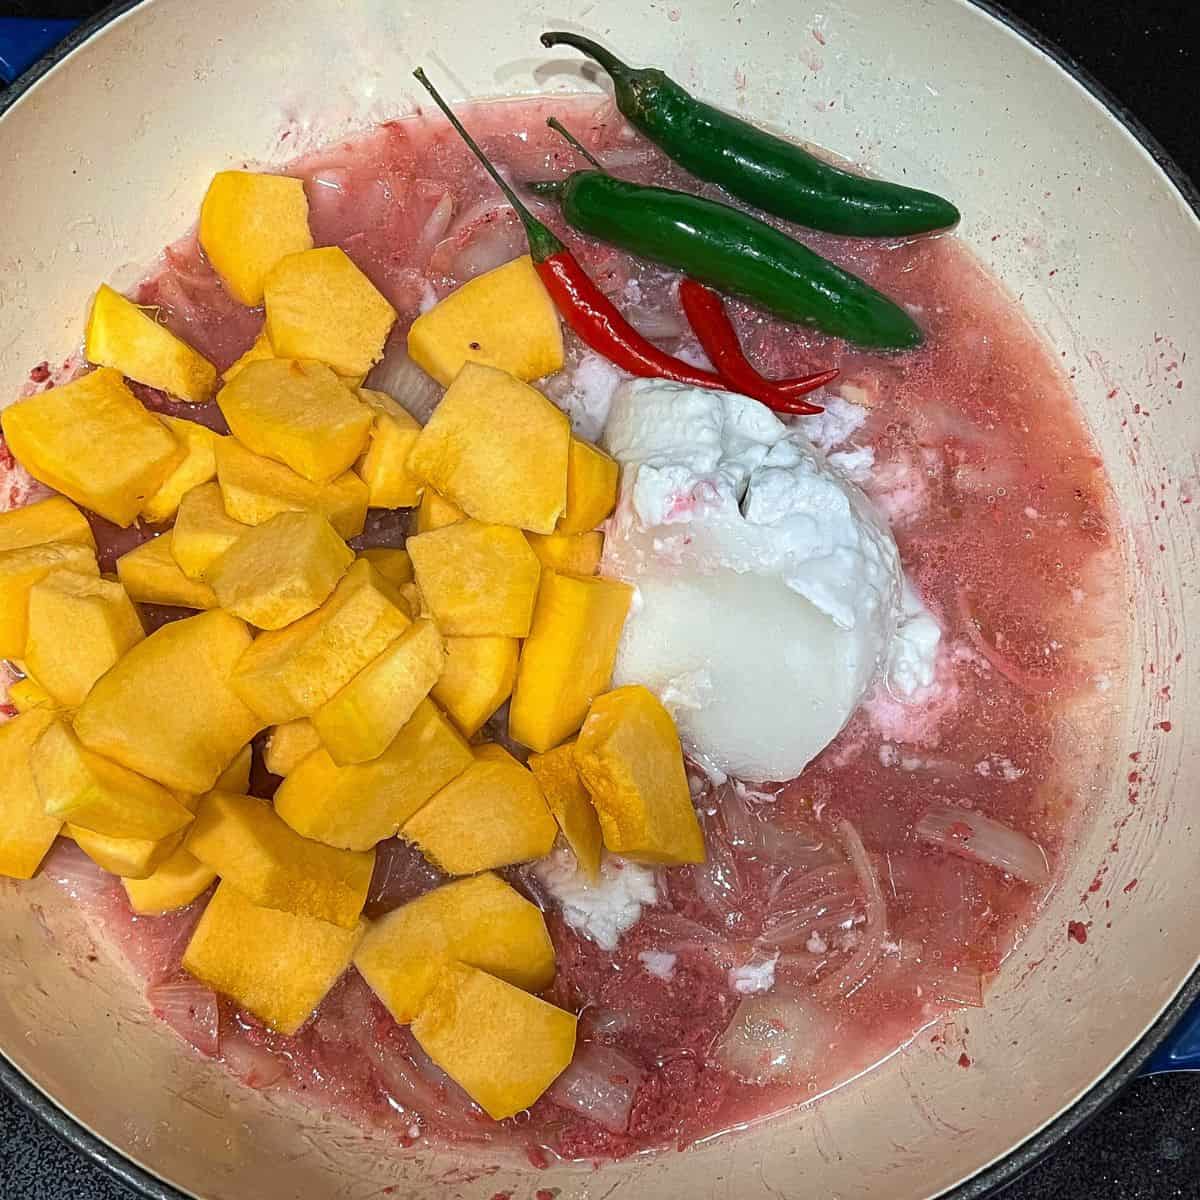 Add squash, coconut milk, red and green chili peppers, and cook.